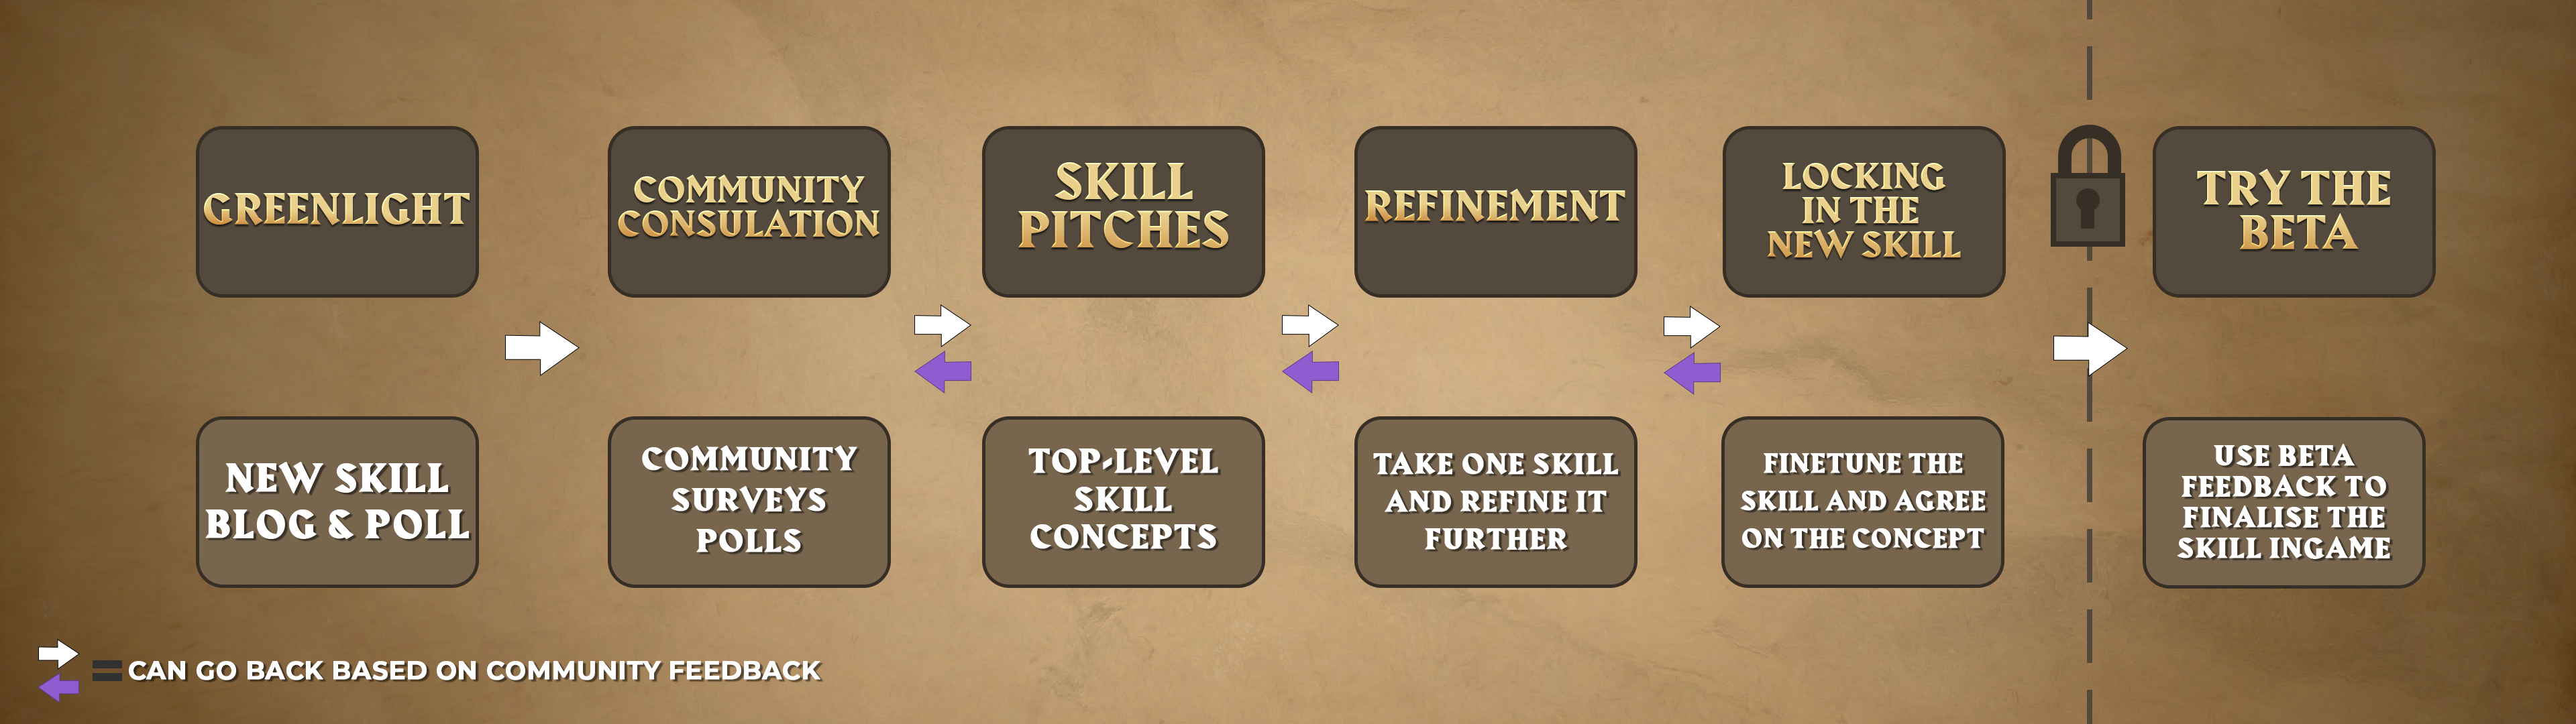 RuneScape reveals roadmap for 2023 that includes new storyline and  Nercomancy skill